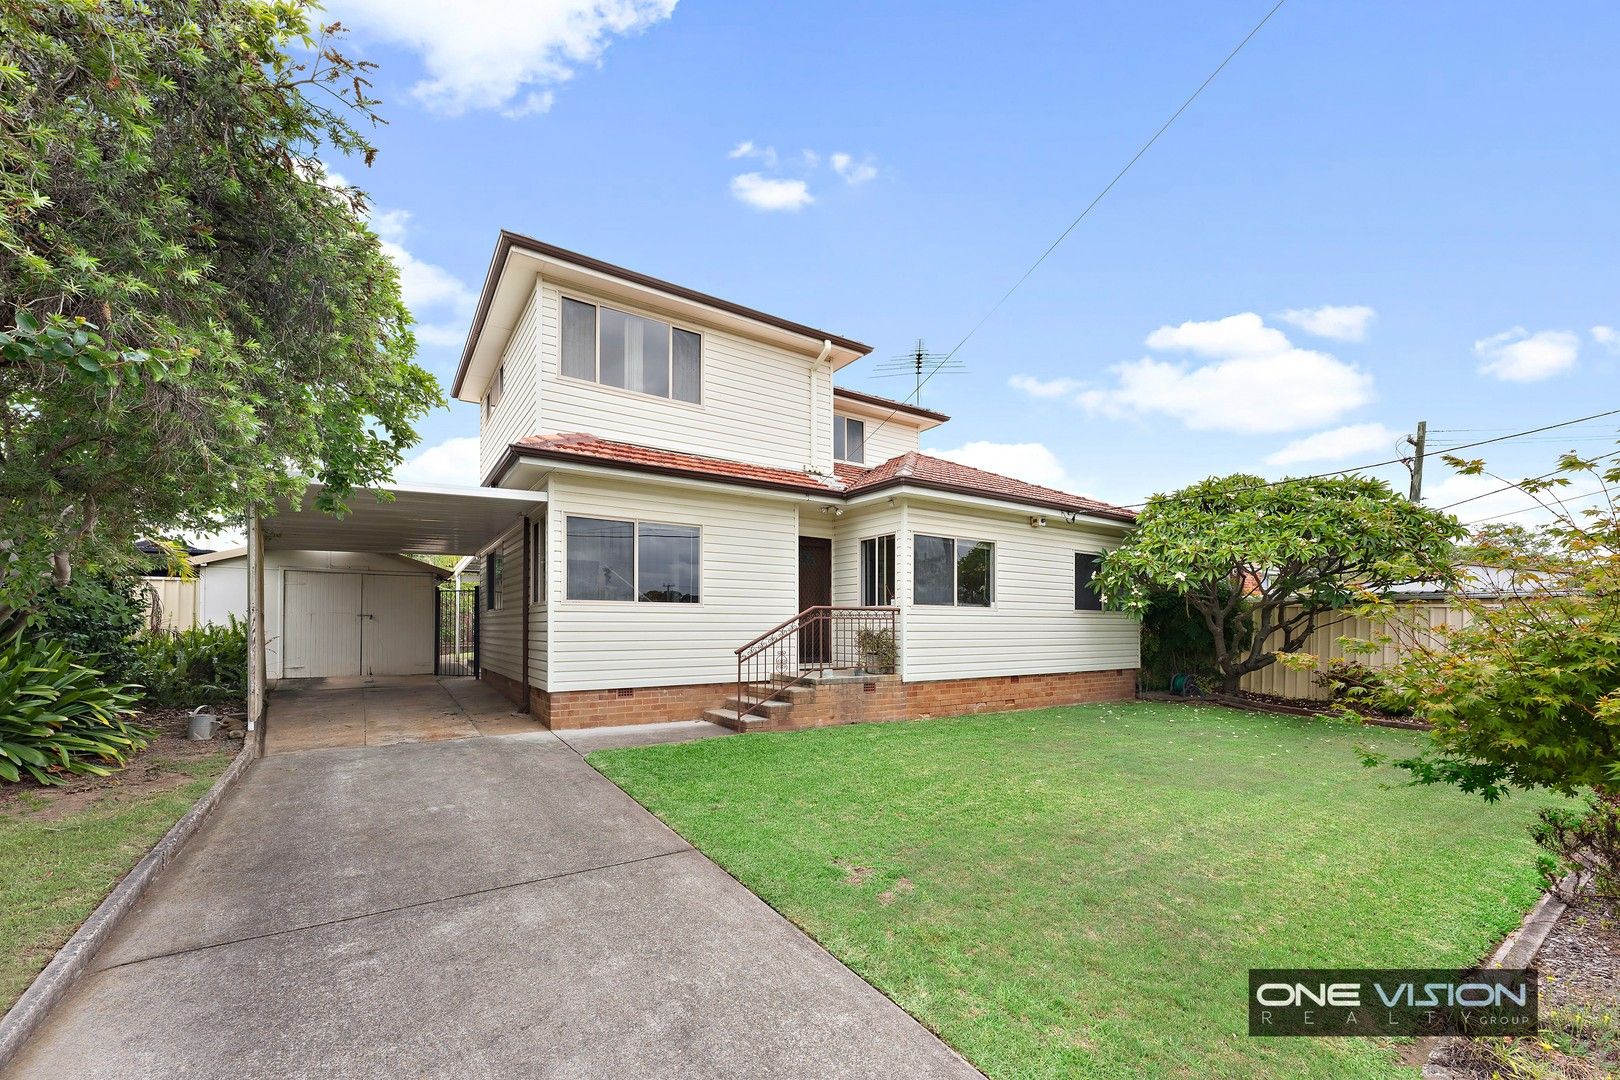 3 bedrooms House in 32 Stafford street GRANVILLE NSW, 2142